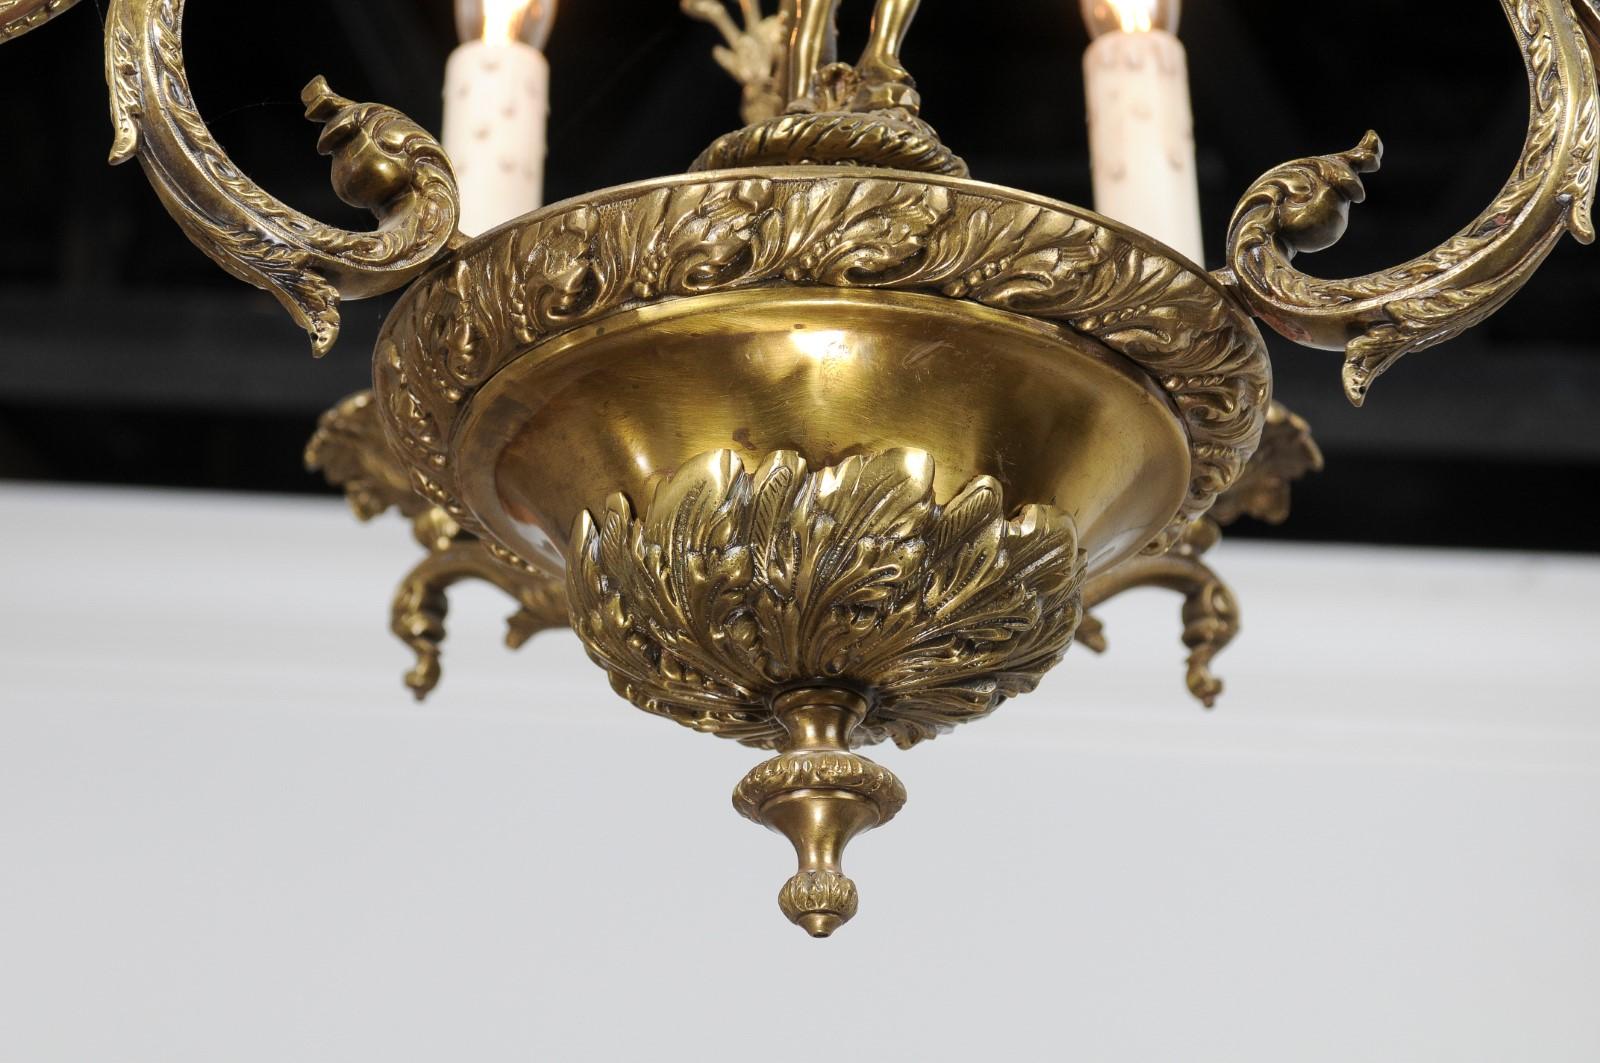 Spanish 19th Century Bronze Six-Light Chandelier with Cherubs and Floral Decor For Sale 1